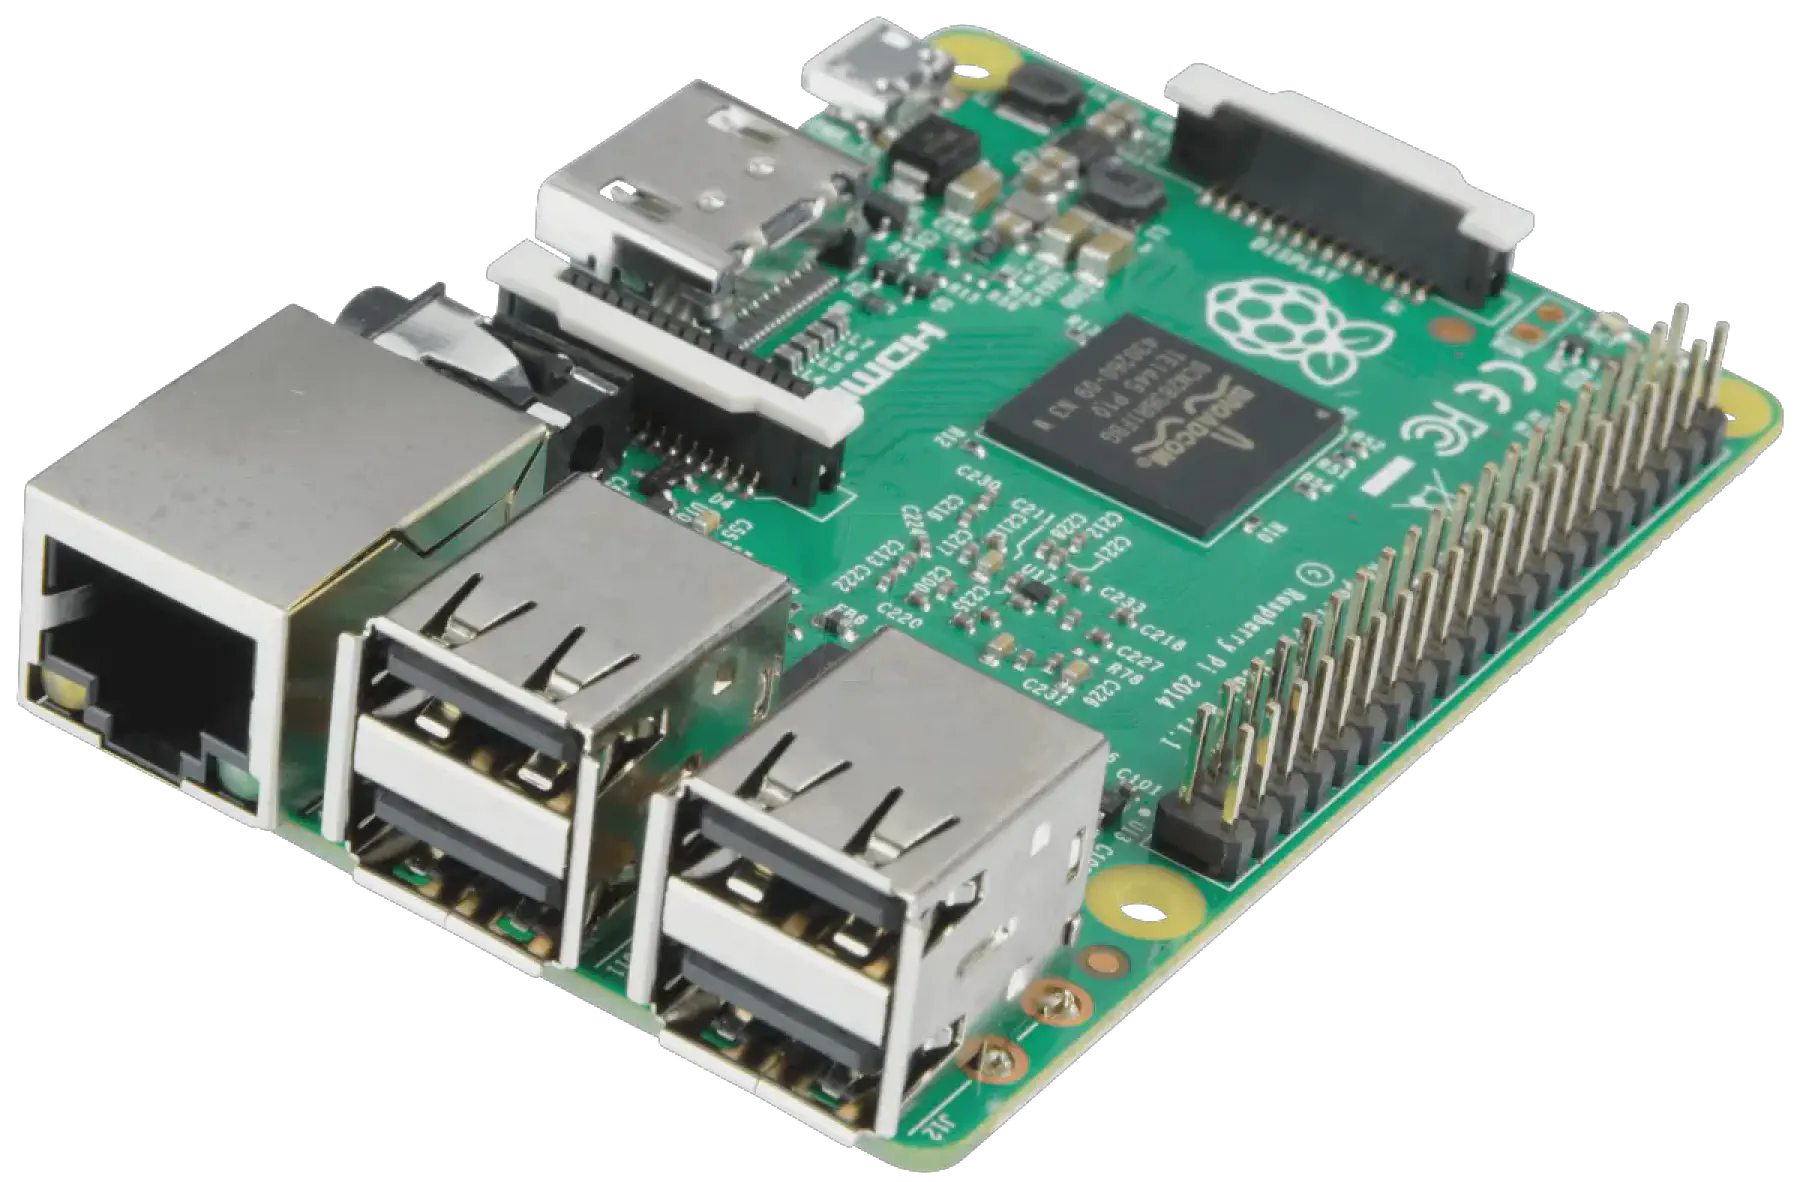 A Raspberry Pi 2, a small creditcard-sized computer